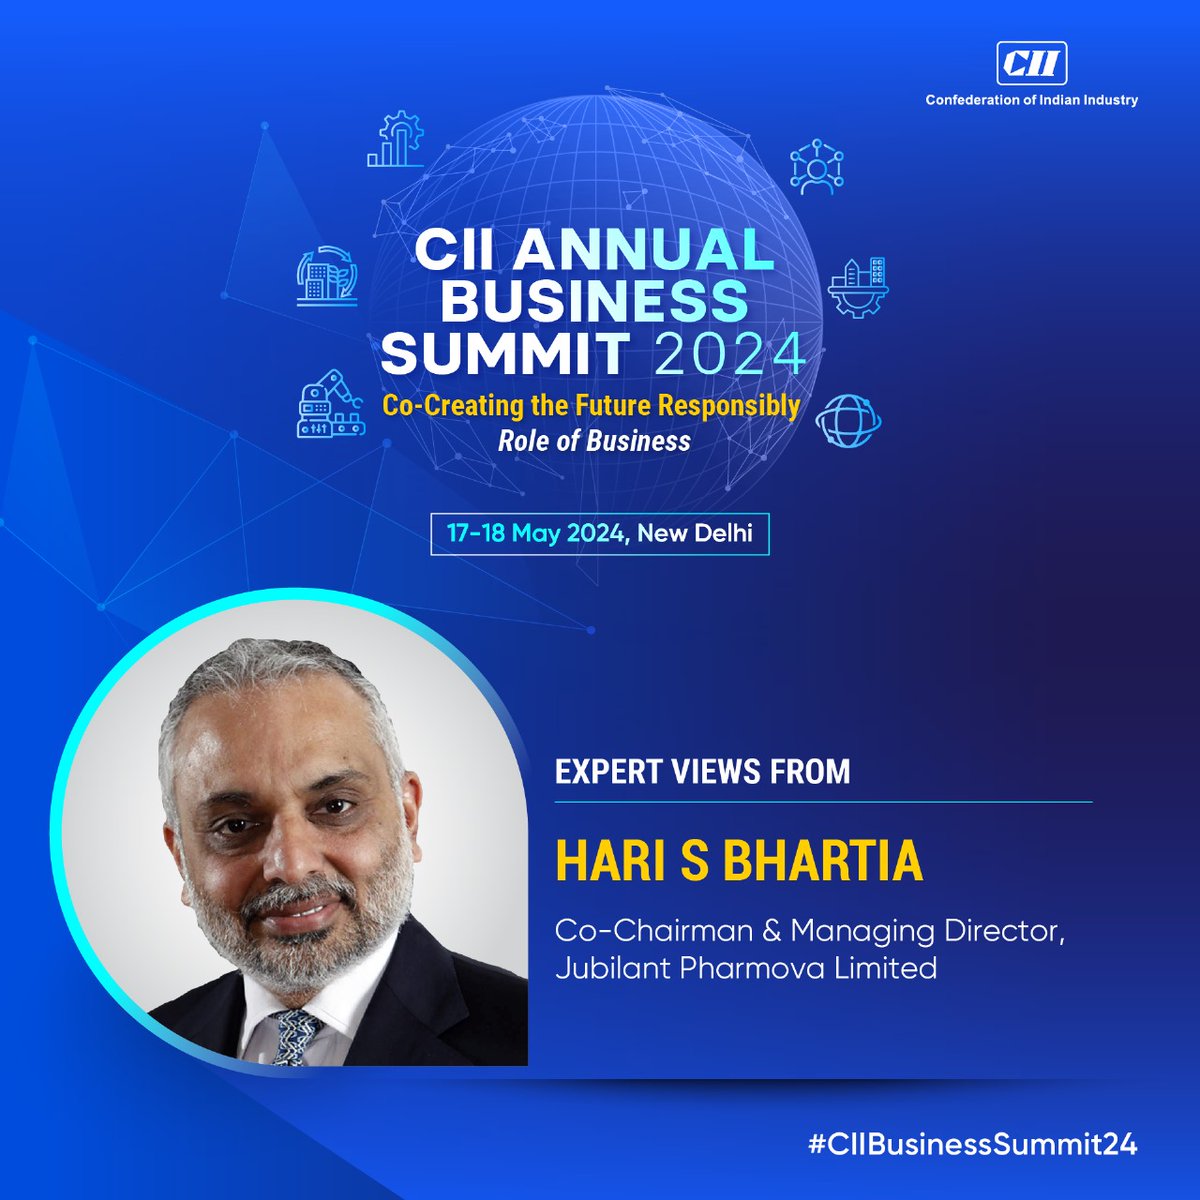 Hari S Bhartia, Co-Chairman & Managing Director, @BhartiaJubilant shares valuable views at the CII Annual Business Summit 2024!
Join for thought provoking discussions on the way ahead for India and its progress on competitiveness, inclusiveness, innovation, globalisation and…